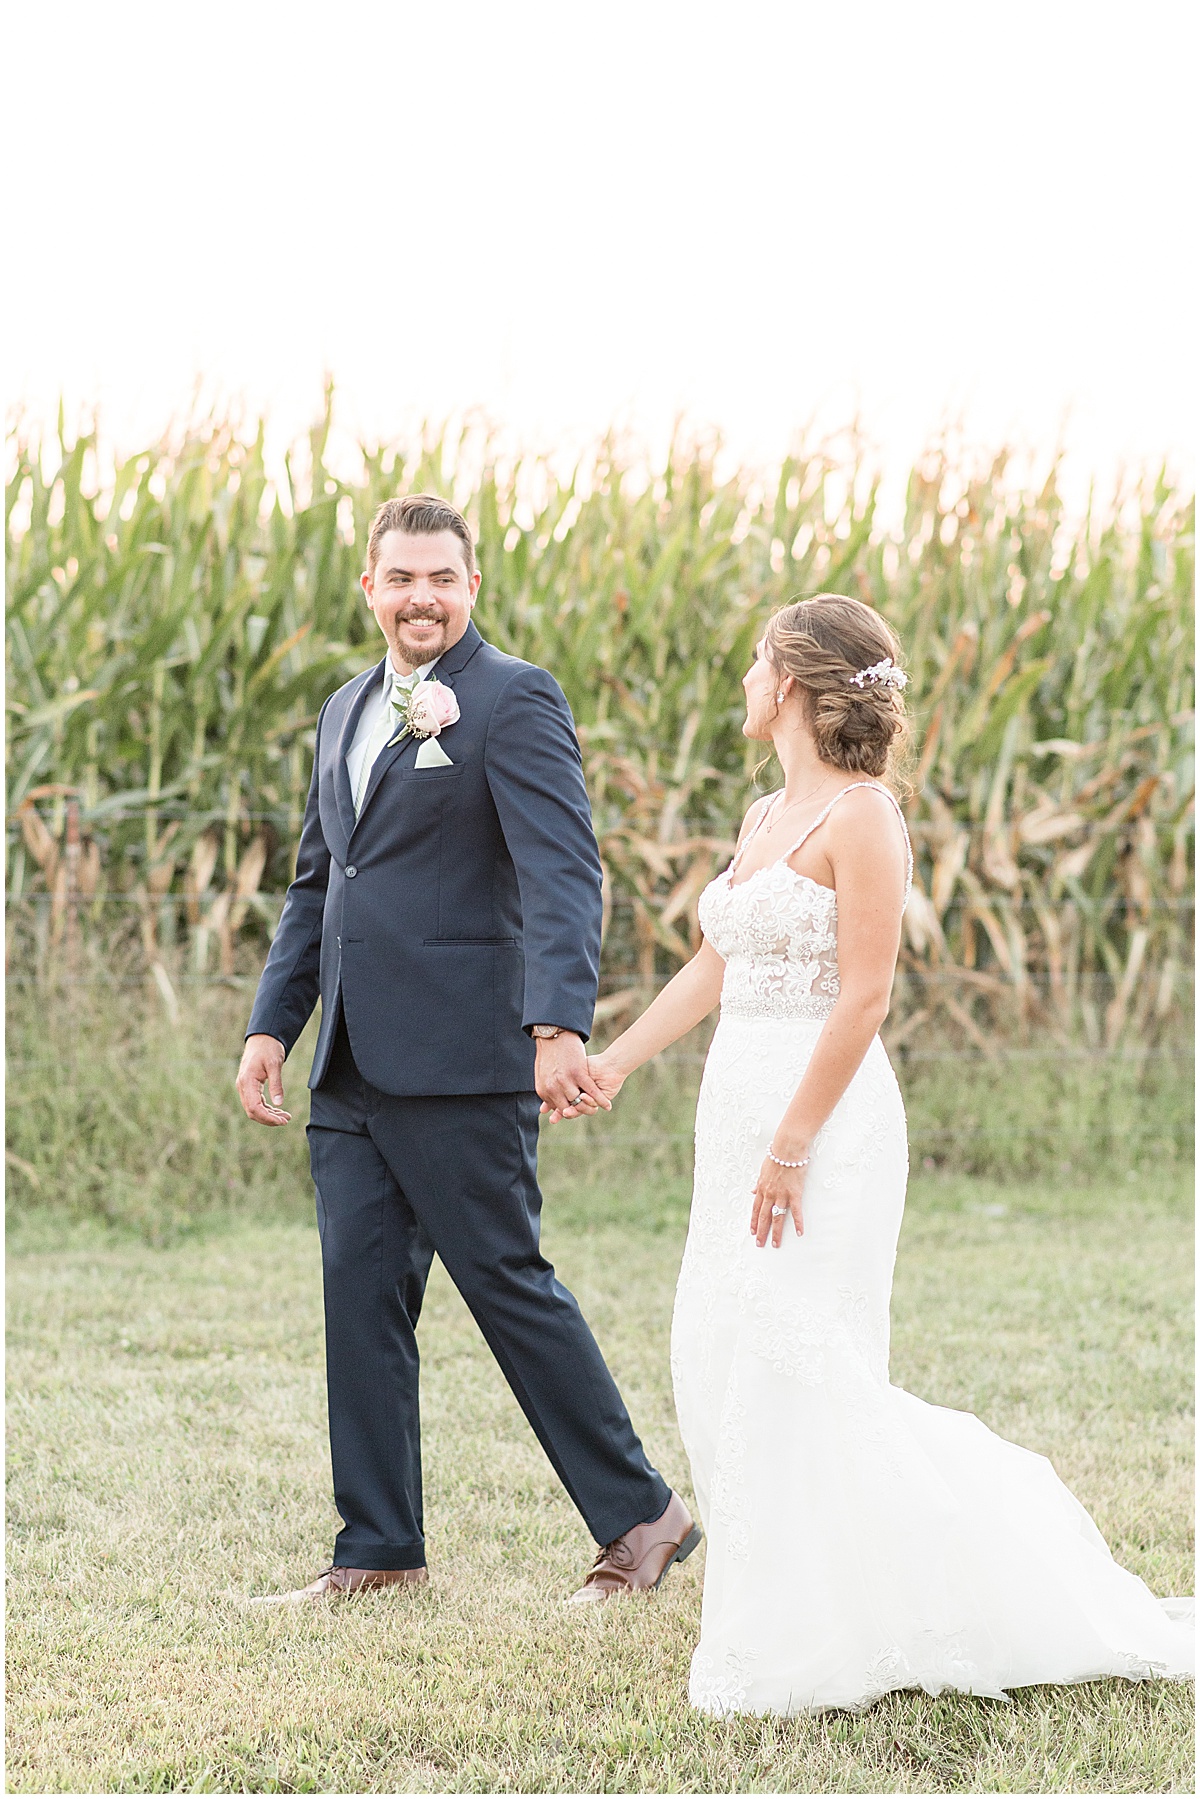 Bride and groom sunset photos at the Jasper County Fairgrounds in Rensselaer, Indiana